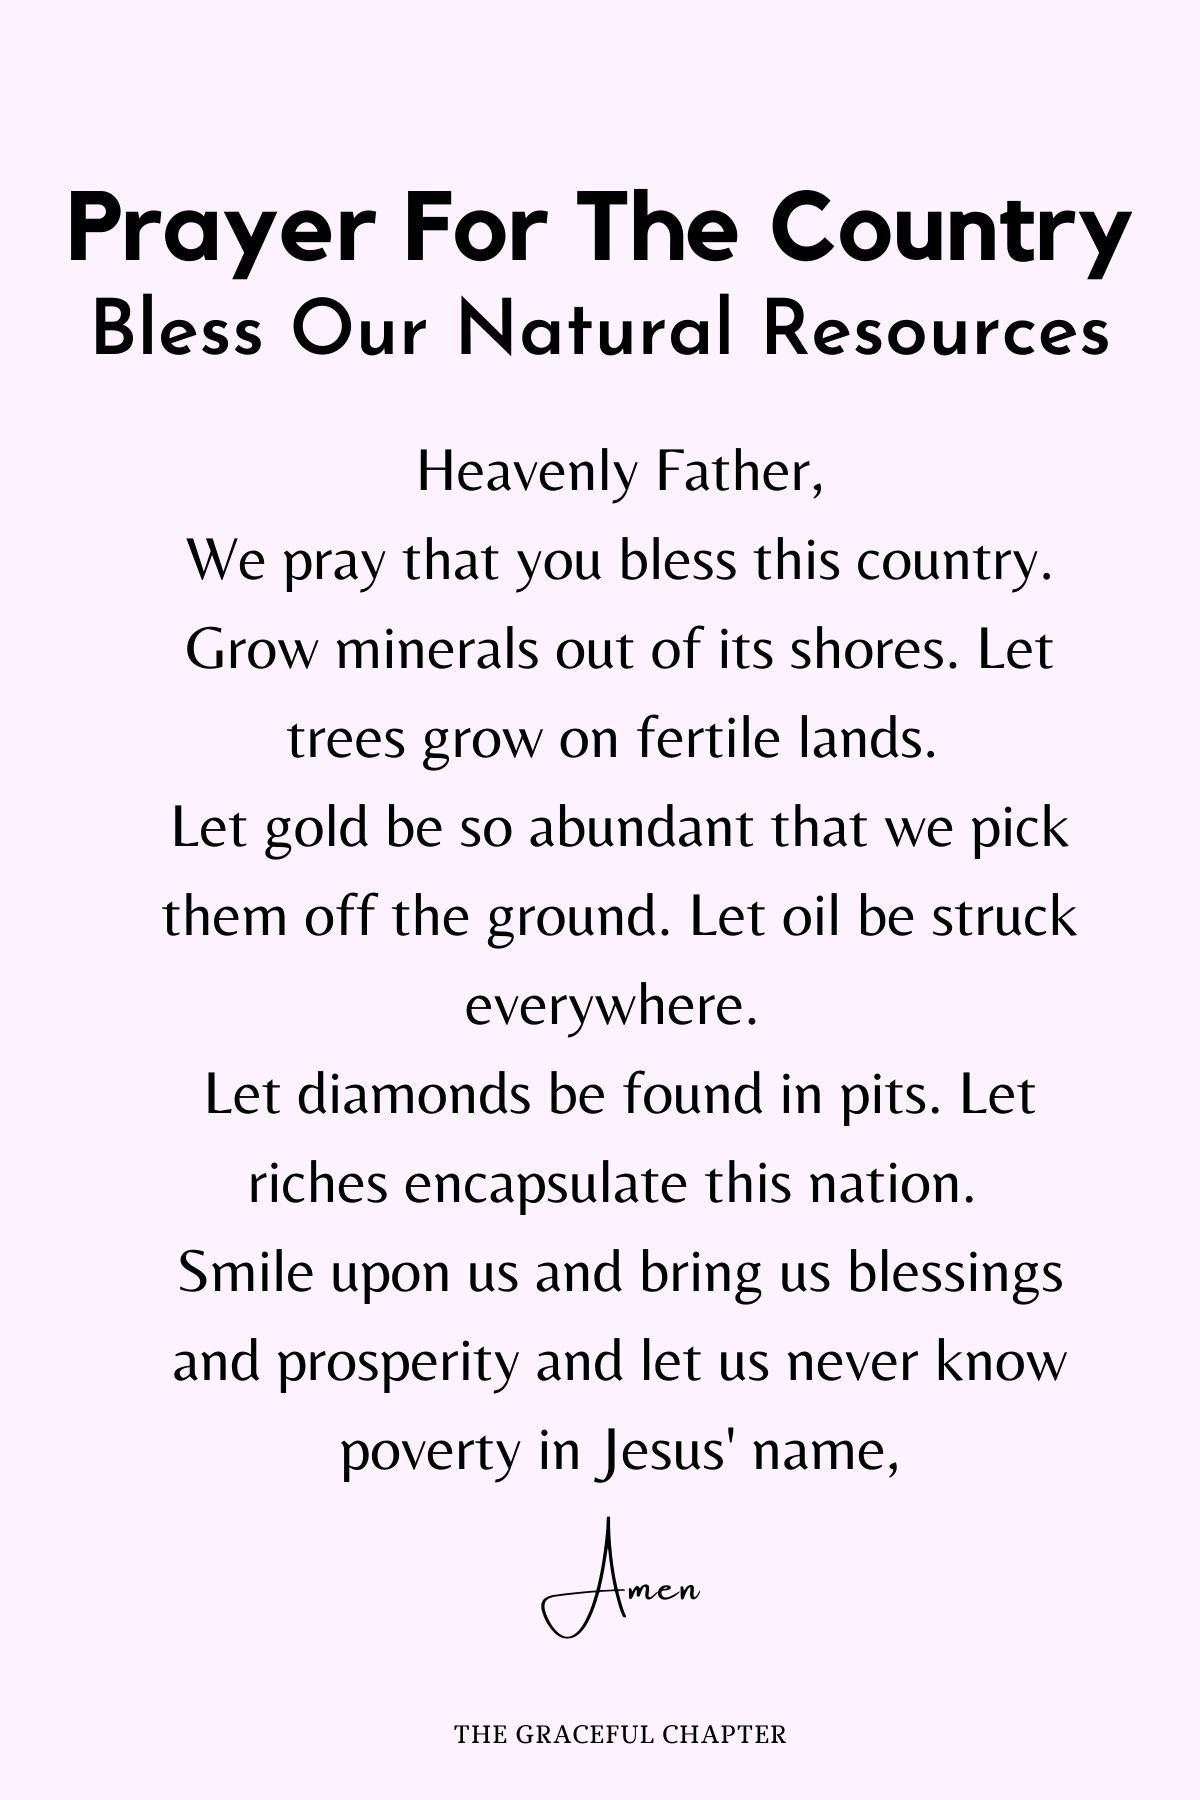 Bless our natural resources - Prayers for the country